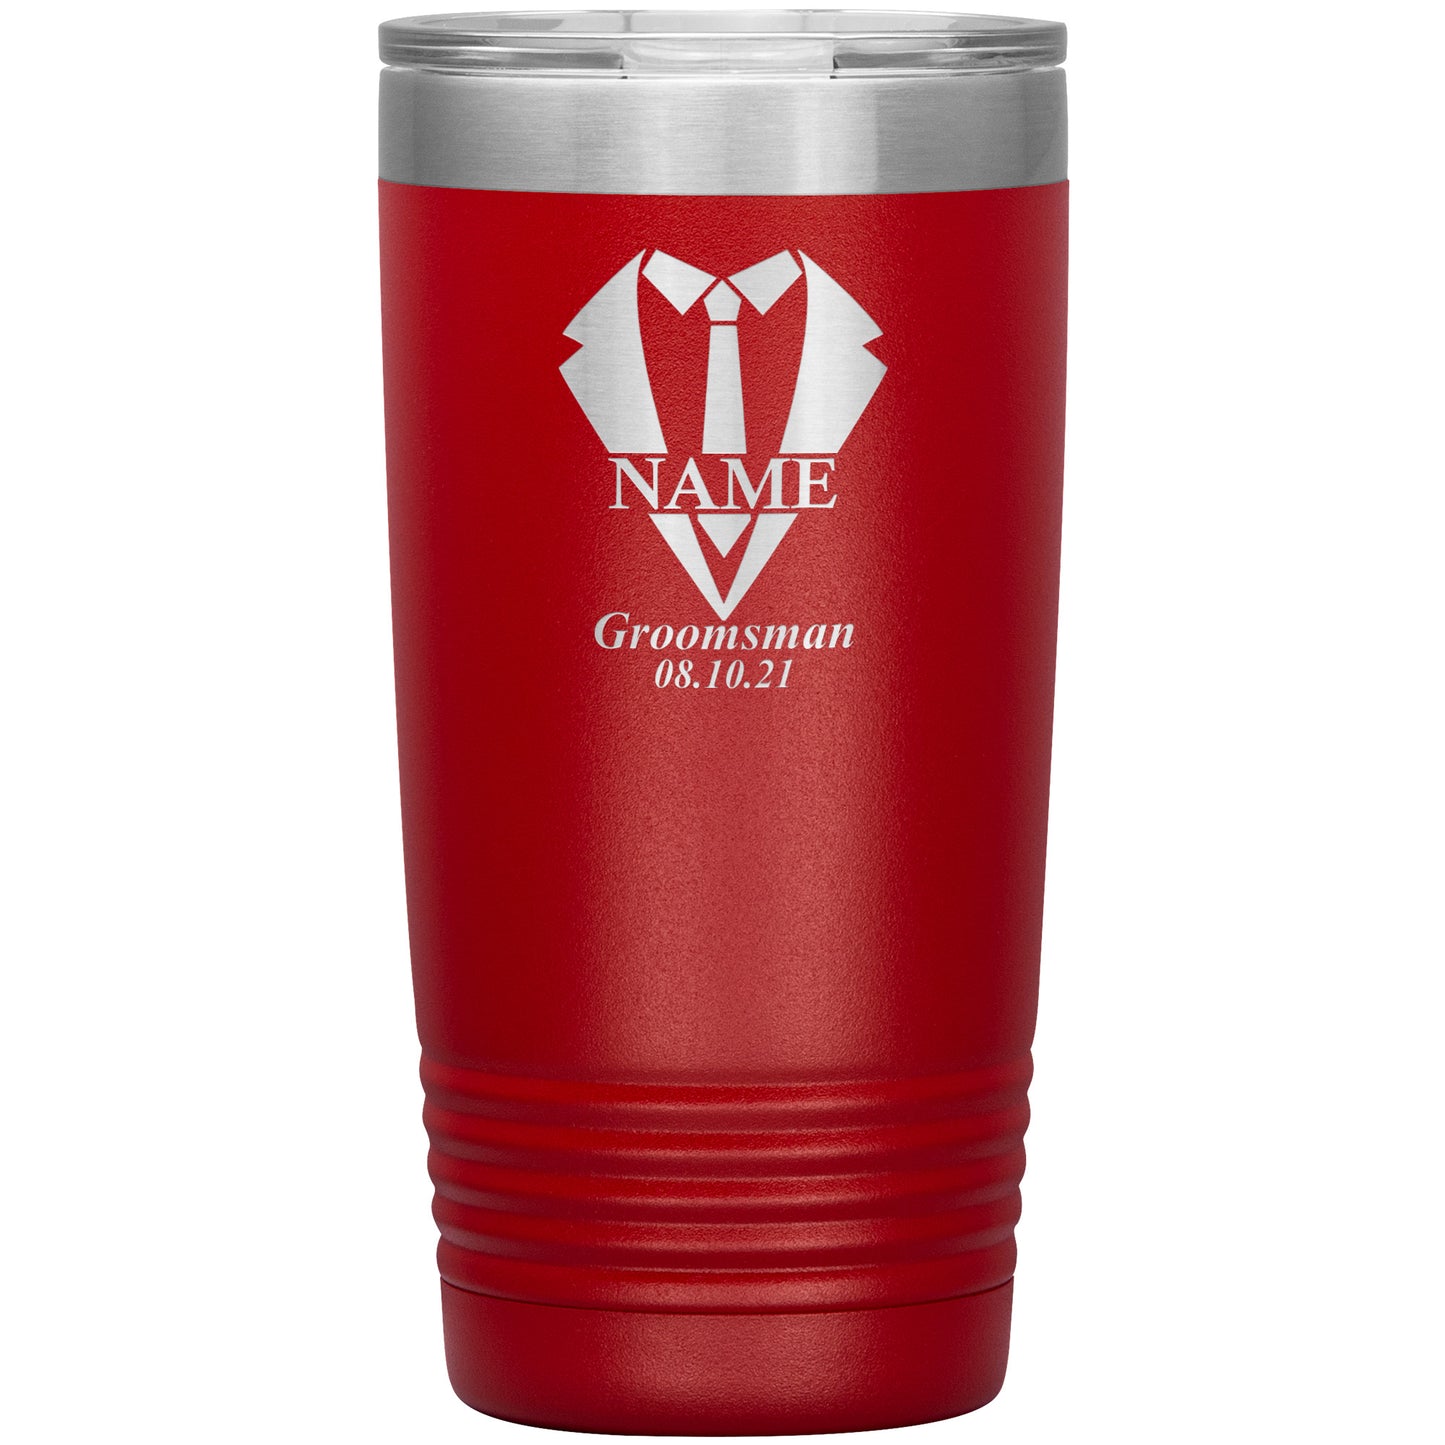 Groomsman Tumbler Drinkware Gift | Bachelor Party Gift | Personalized Engraved Tumbler